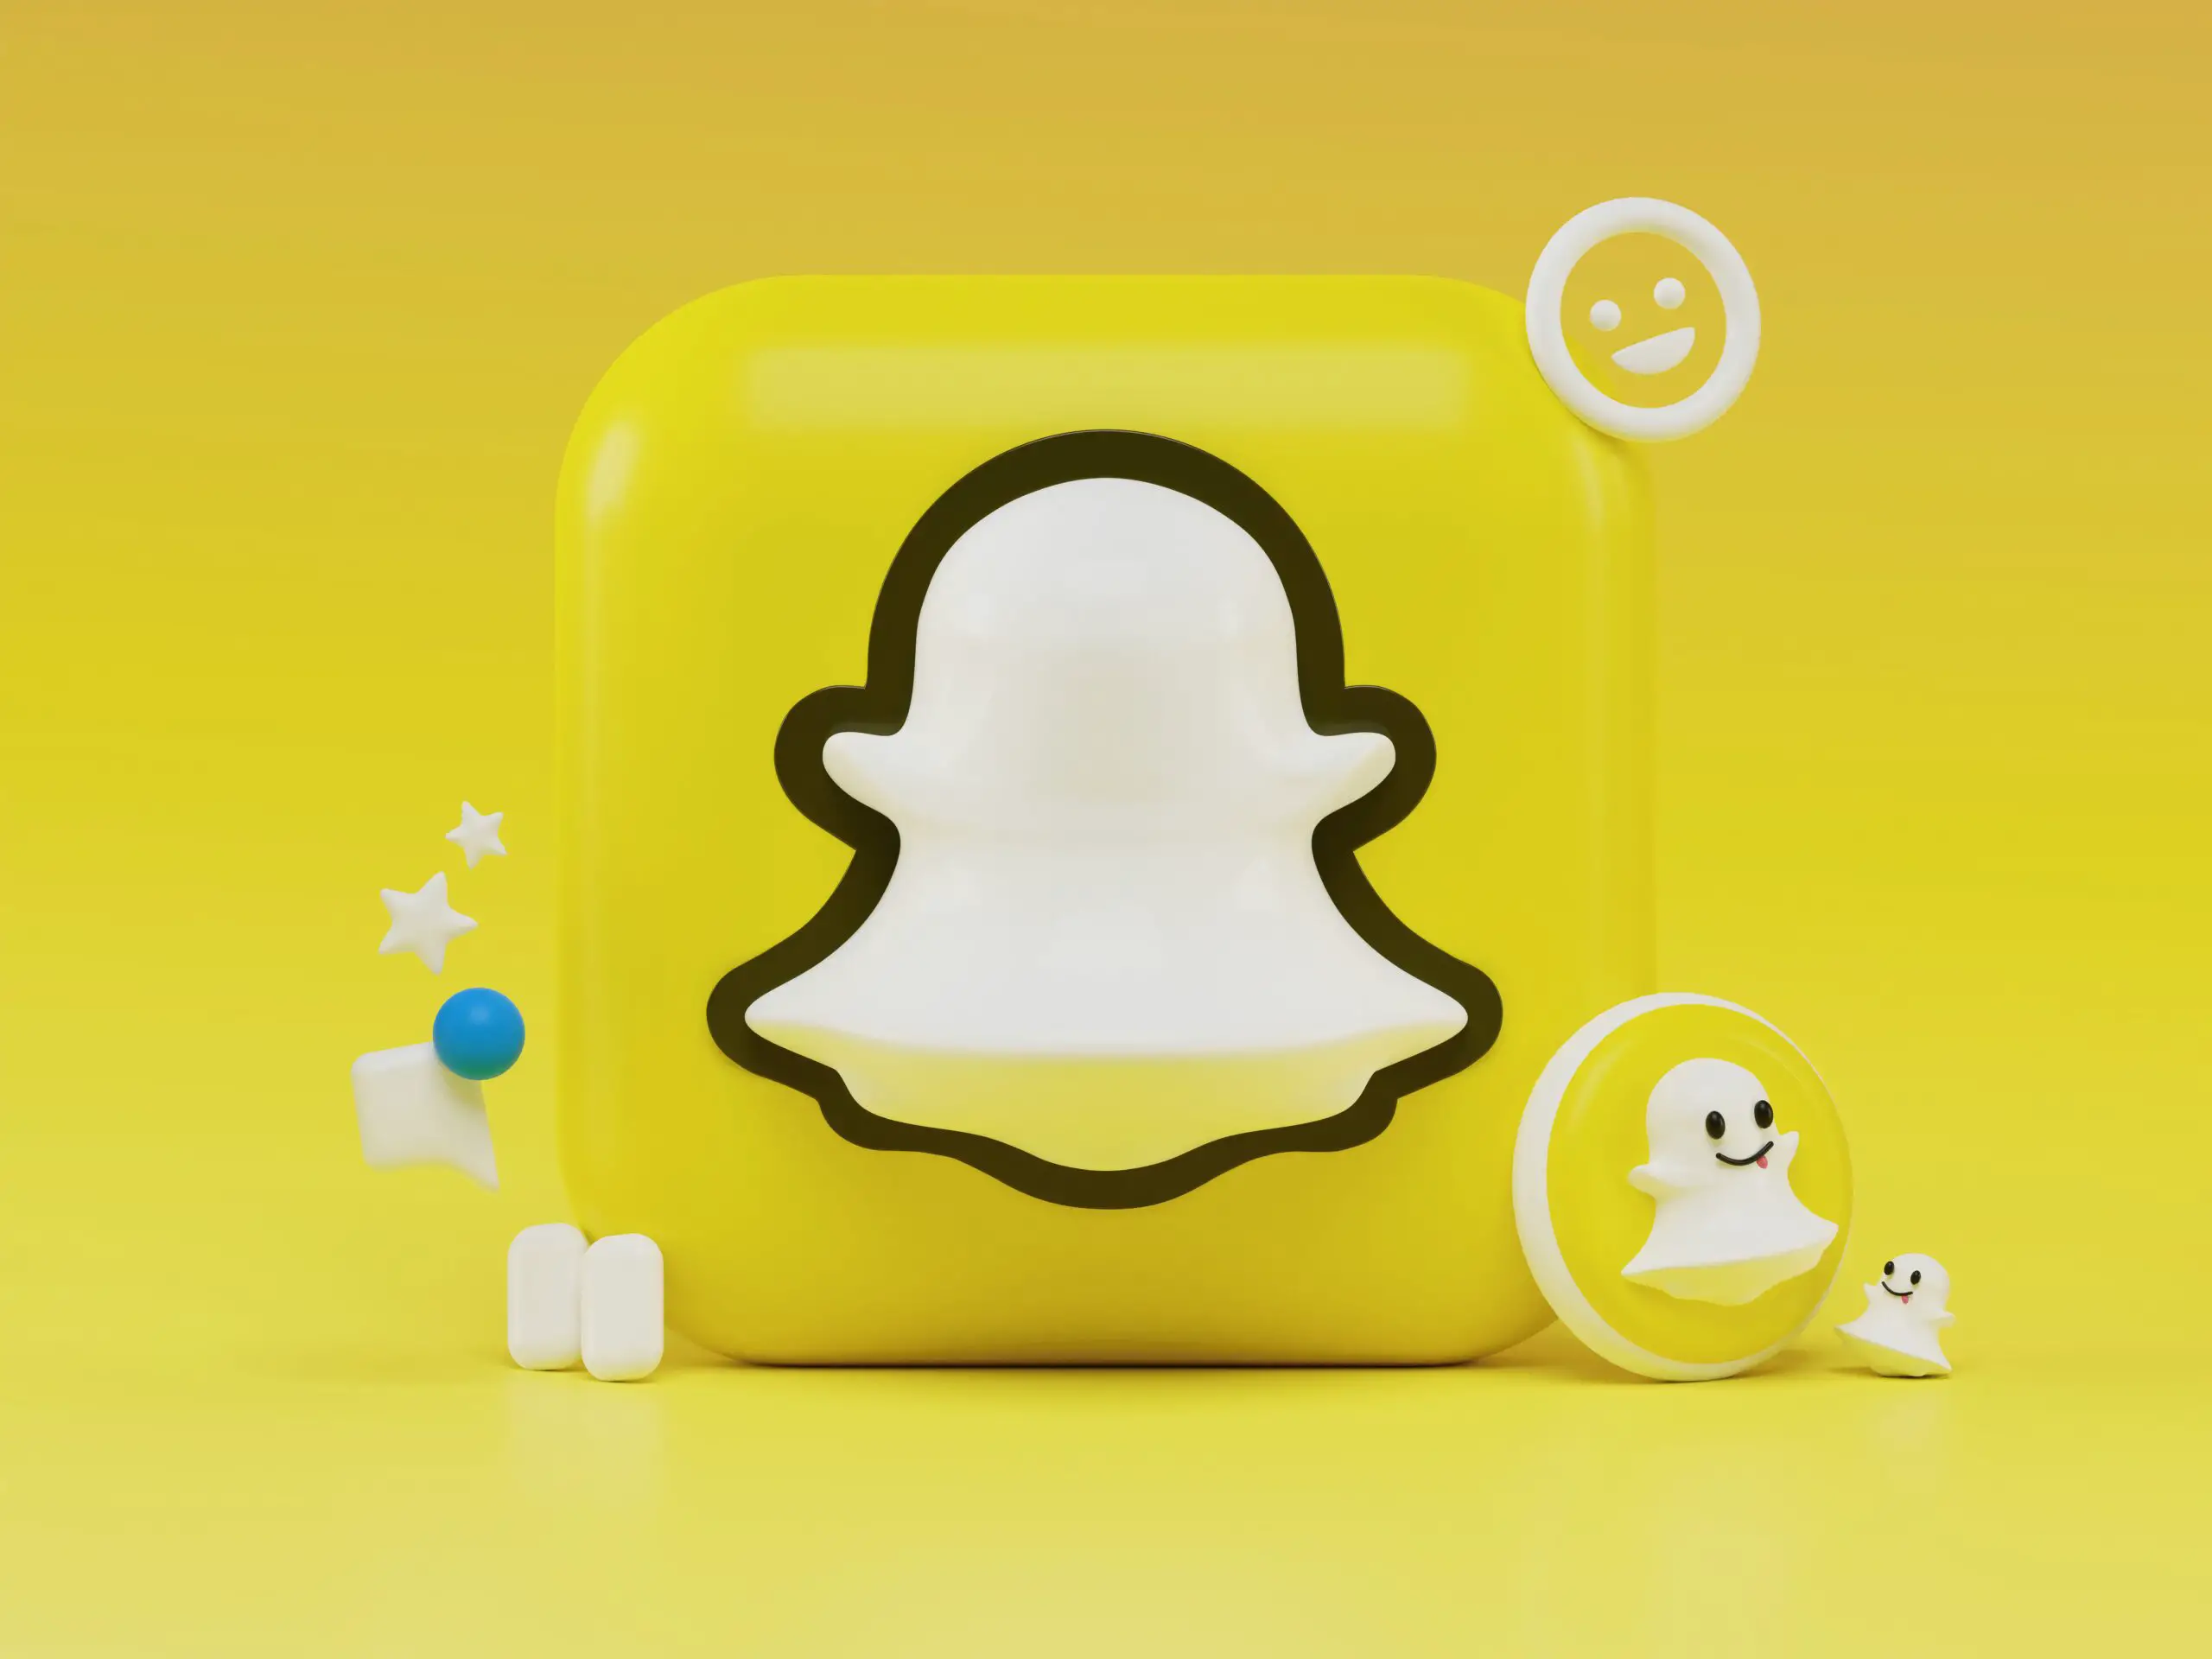 How To Get Snapchat On Pc Without Bluestacks? 